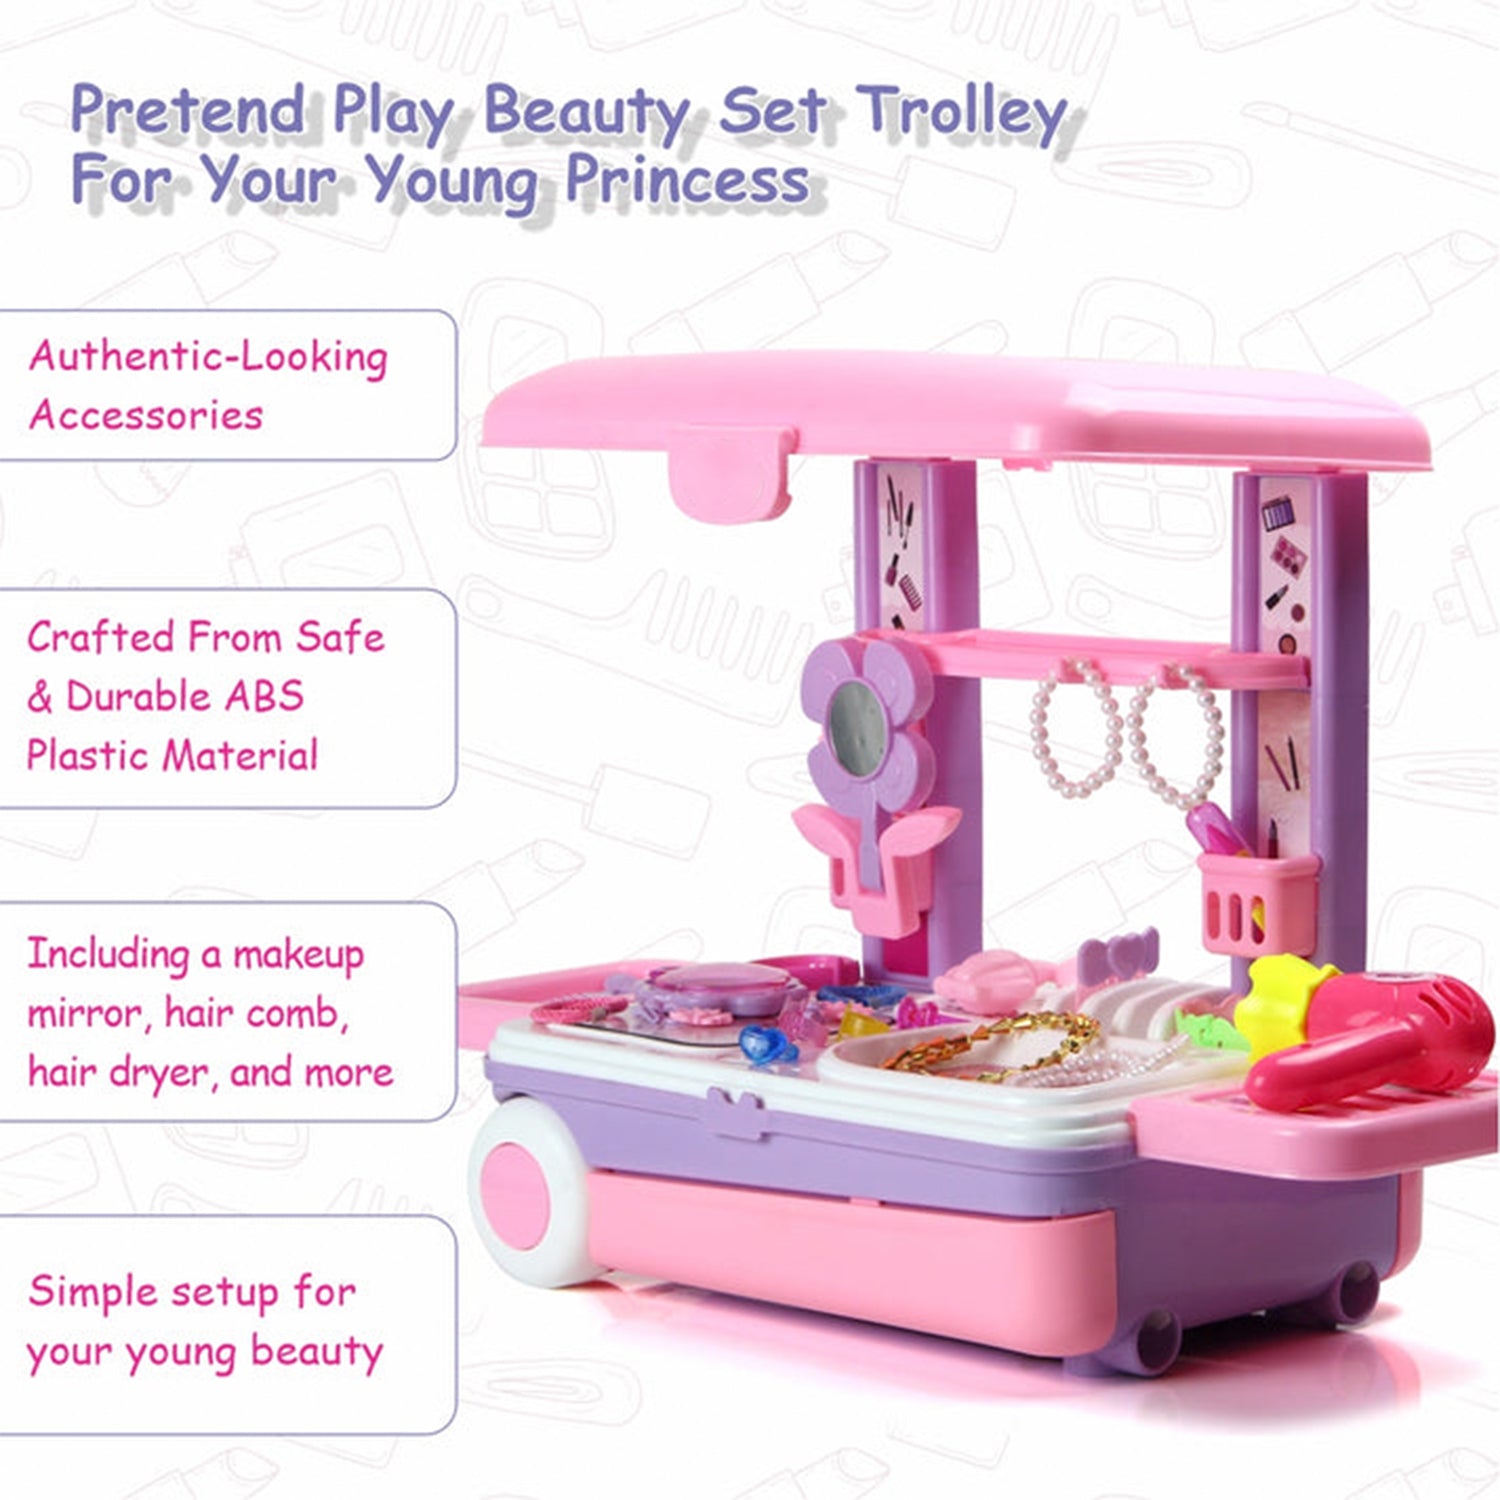 17746 Big Beauty Set Suitcase On Wheel, The Ultimate Beauty Set On Wheels for Girls, Makeup Kit is Easy to Clean & Use, Portable Beauty Set with 25 Pieces for 3 Years BIS Approved. (Beauty Set Trolley)